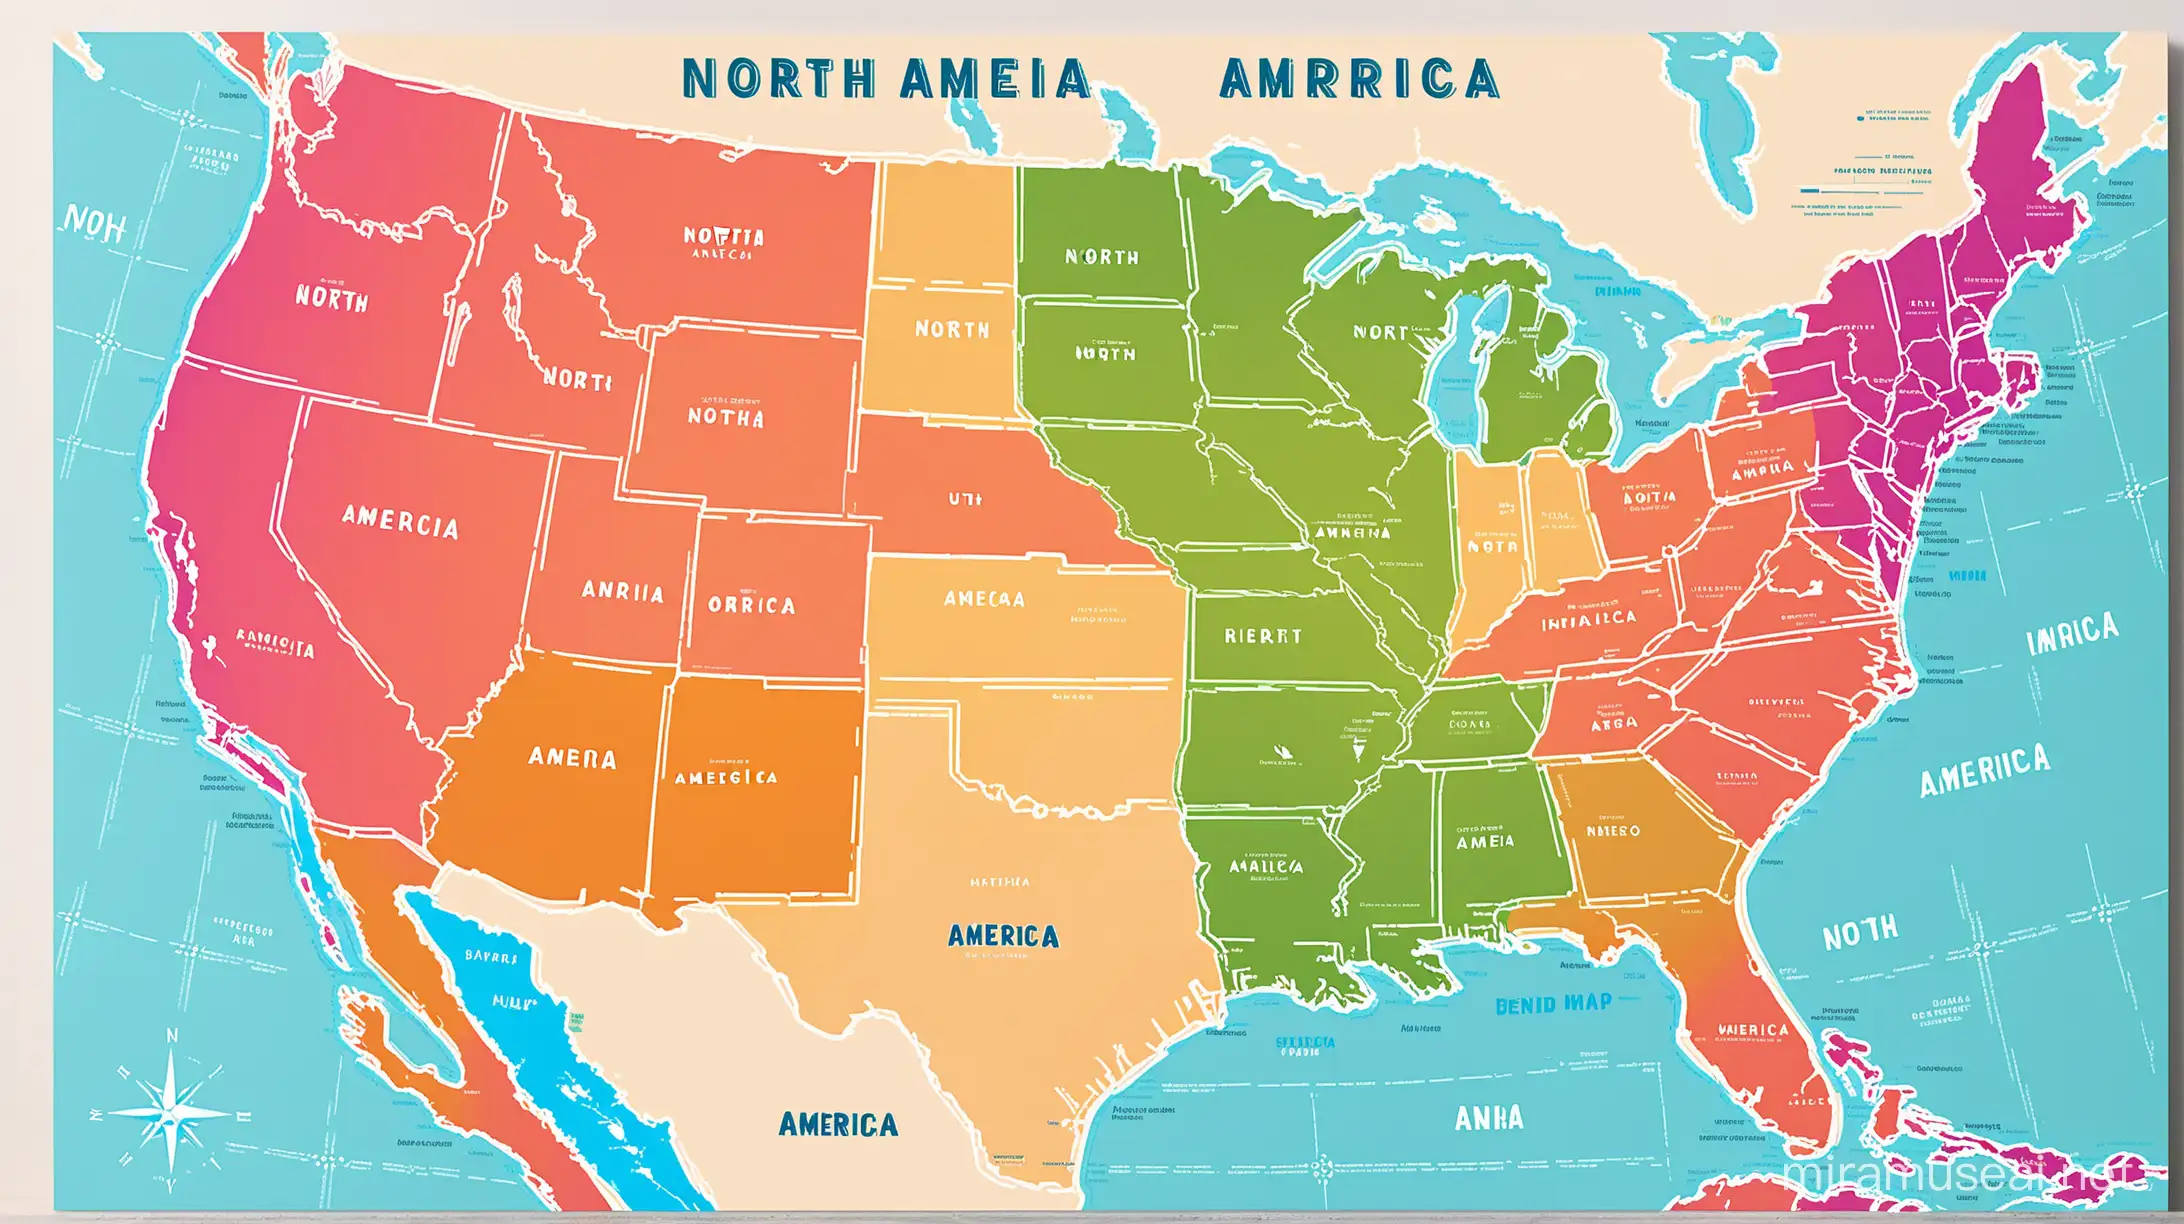 Vibrant North America Map Illustration of Continents Diverse Geography and Landscapes